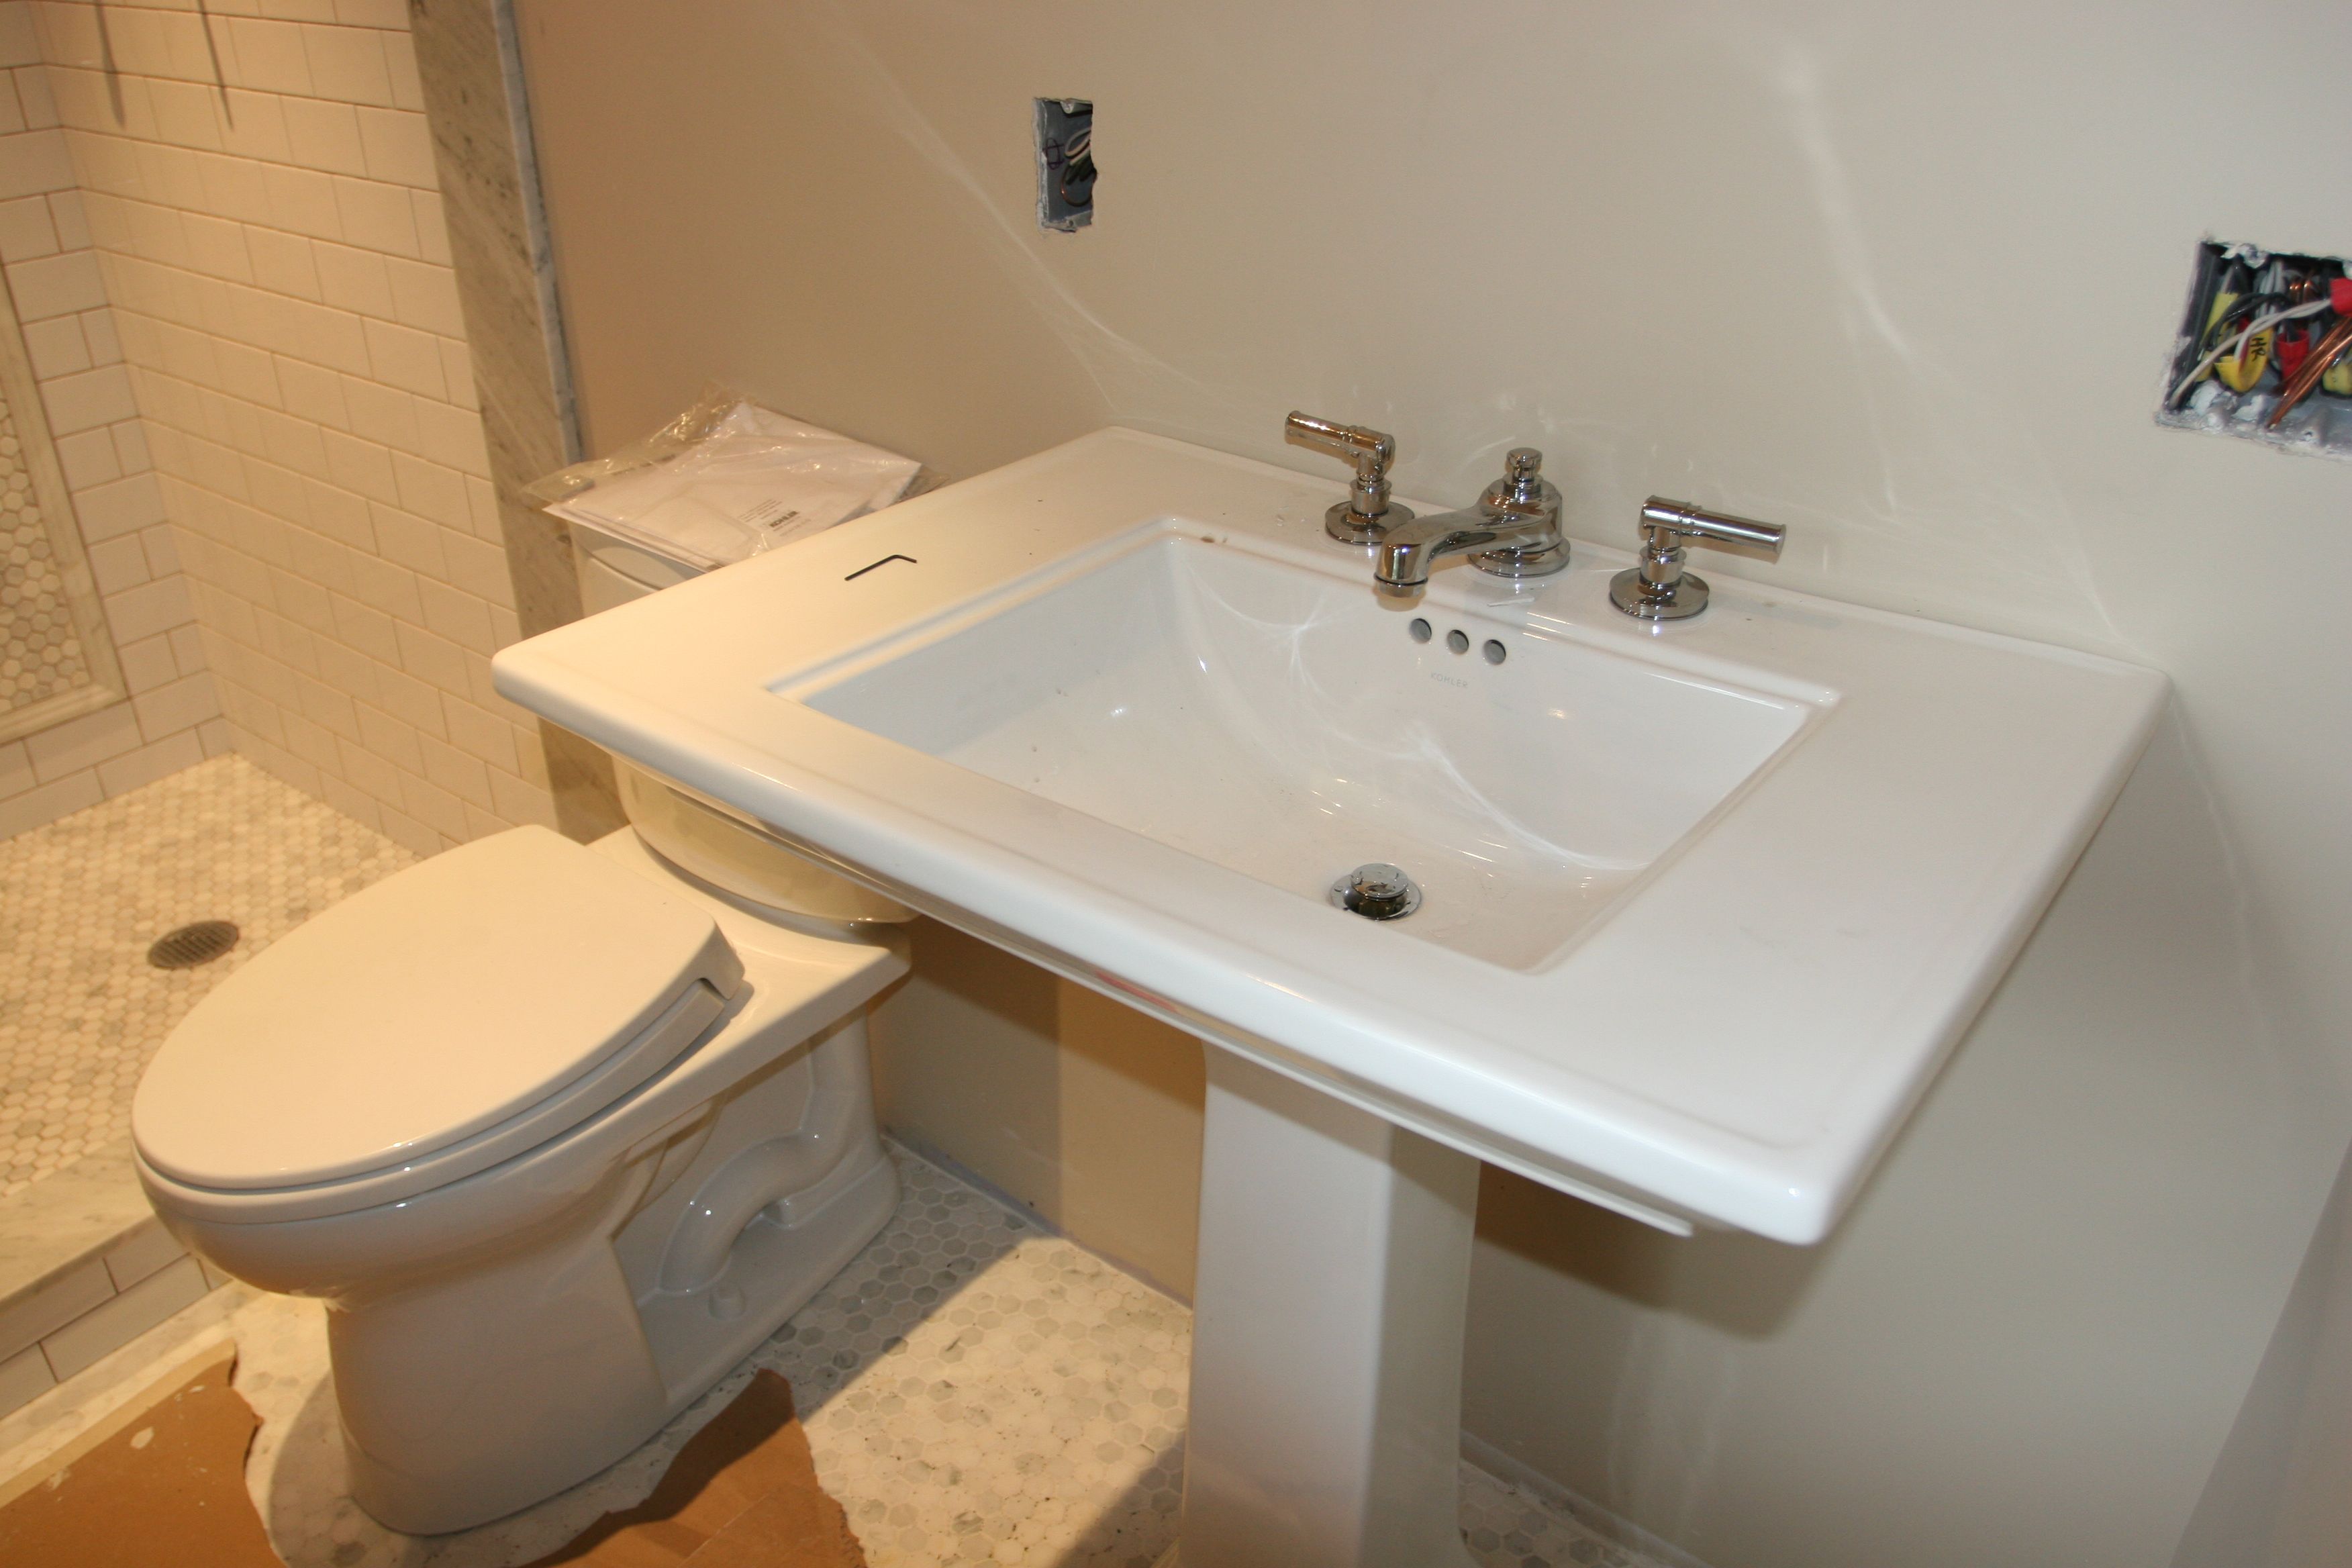 Ta-dah! Master bath sink and toilet! Also, working!